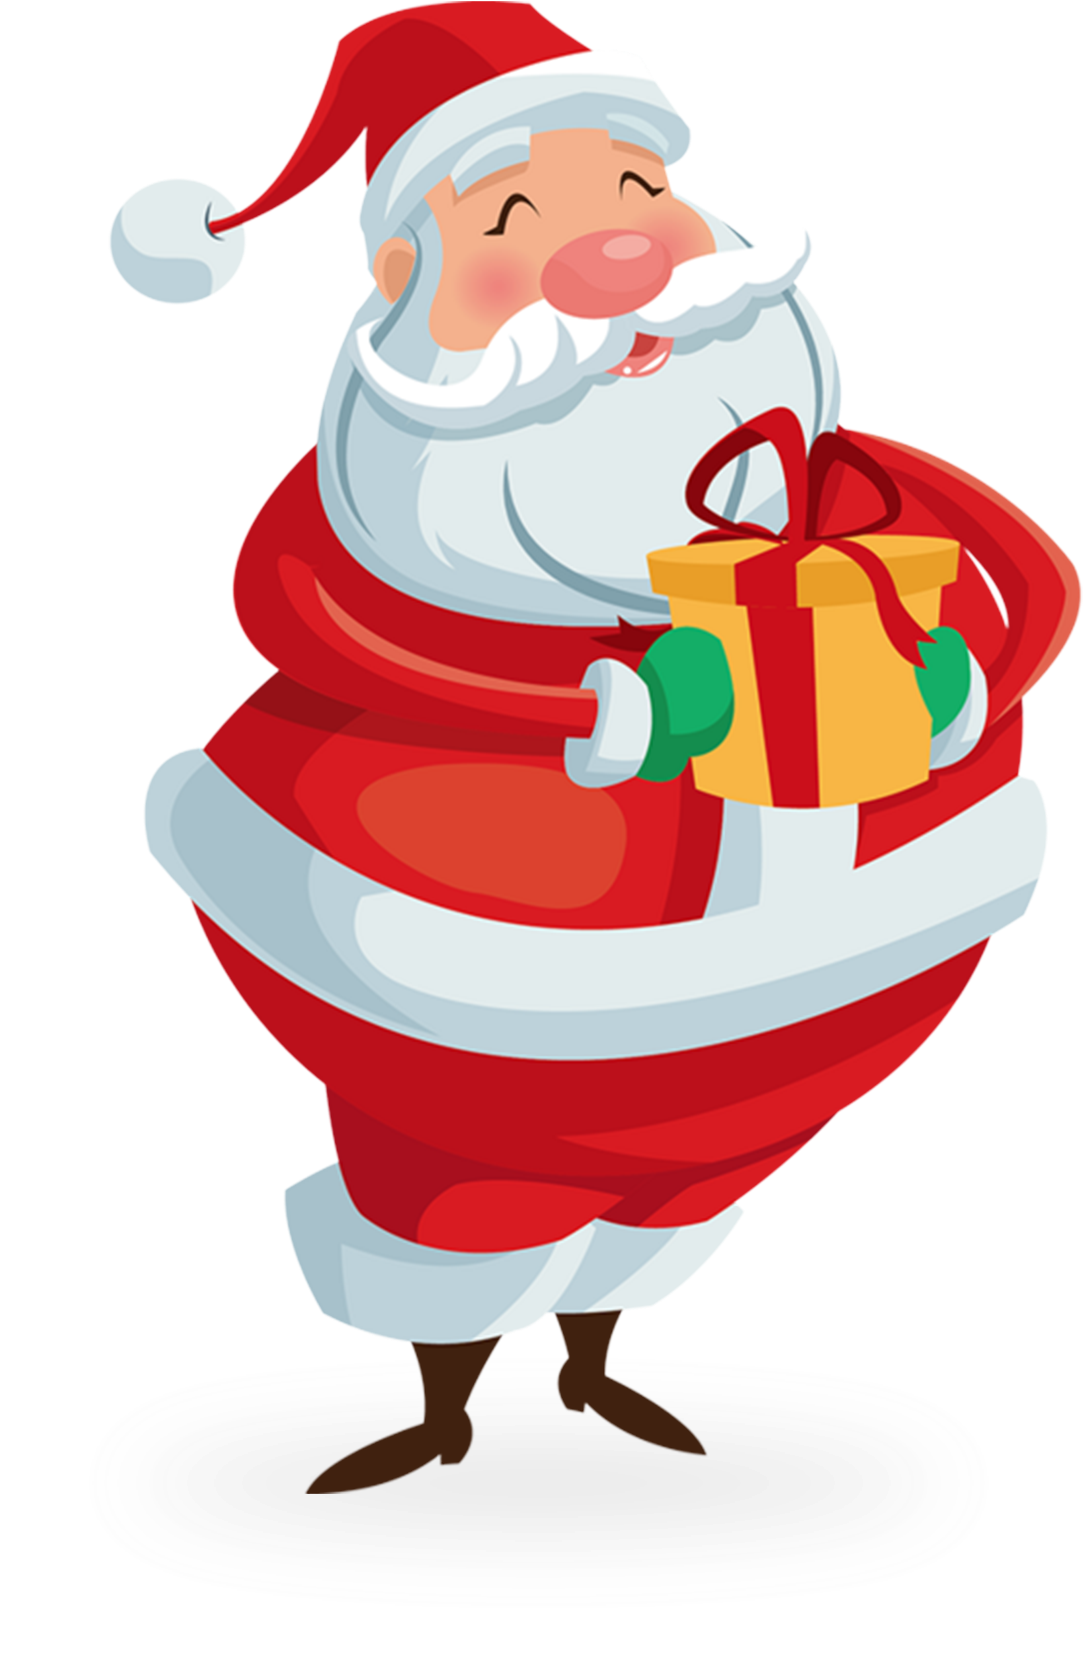 Cheerful Santa Clauswith Gift Illustration PNG